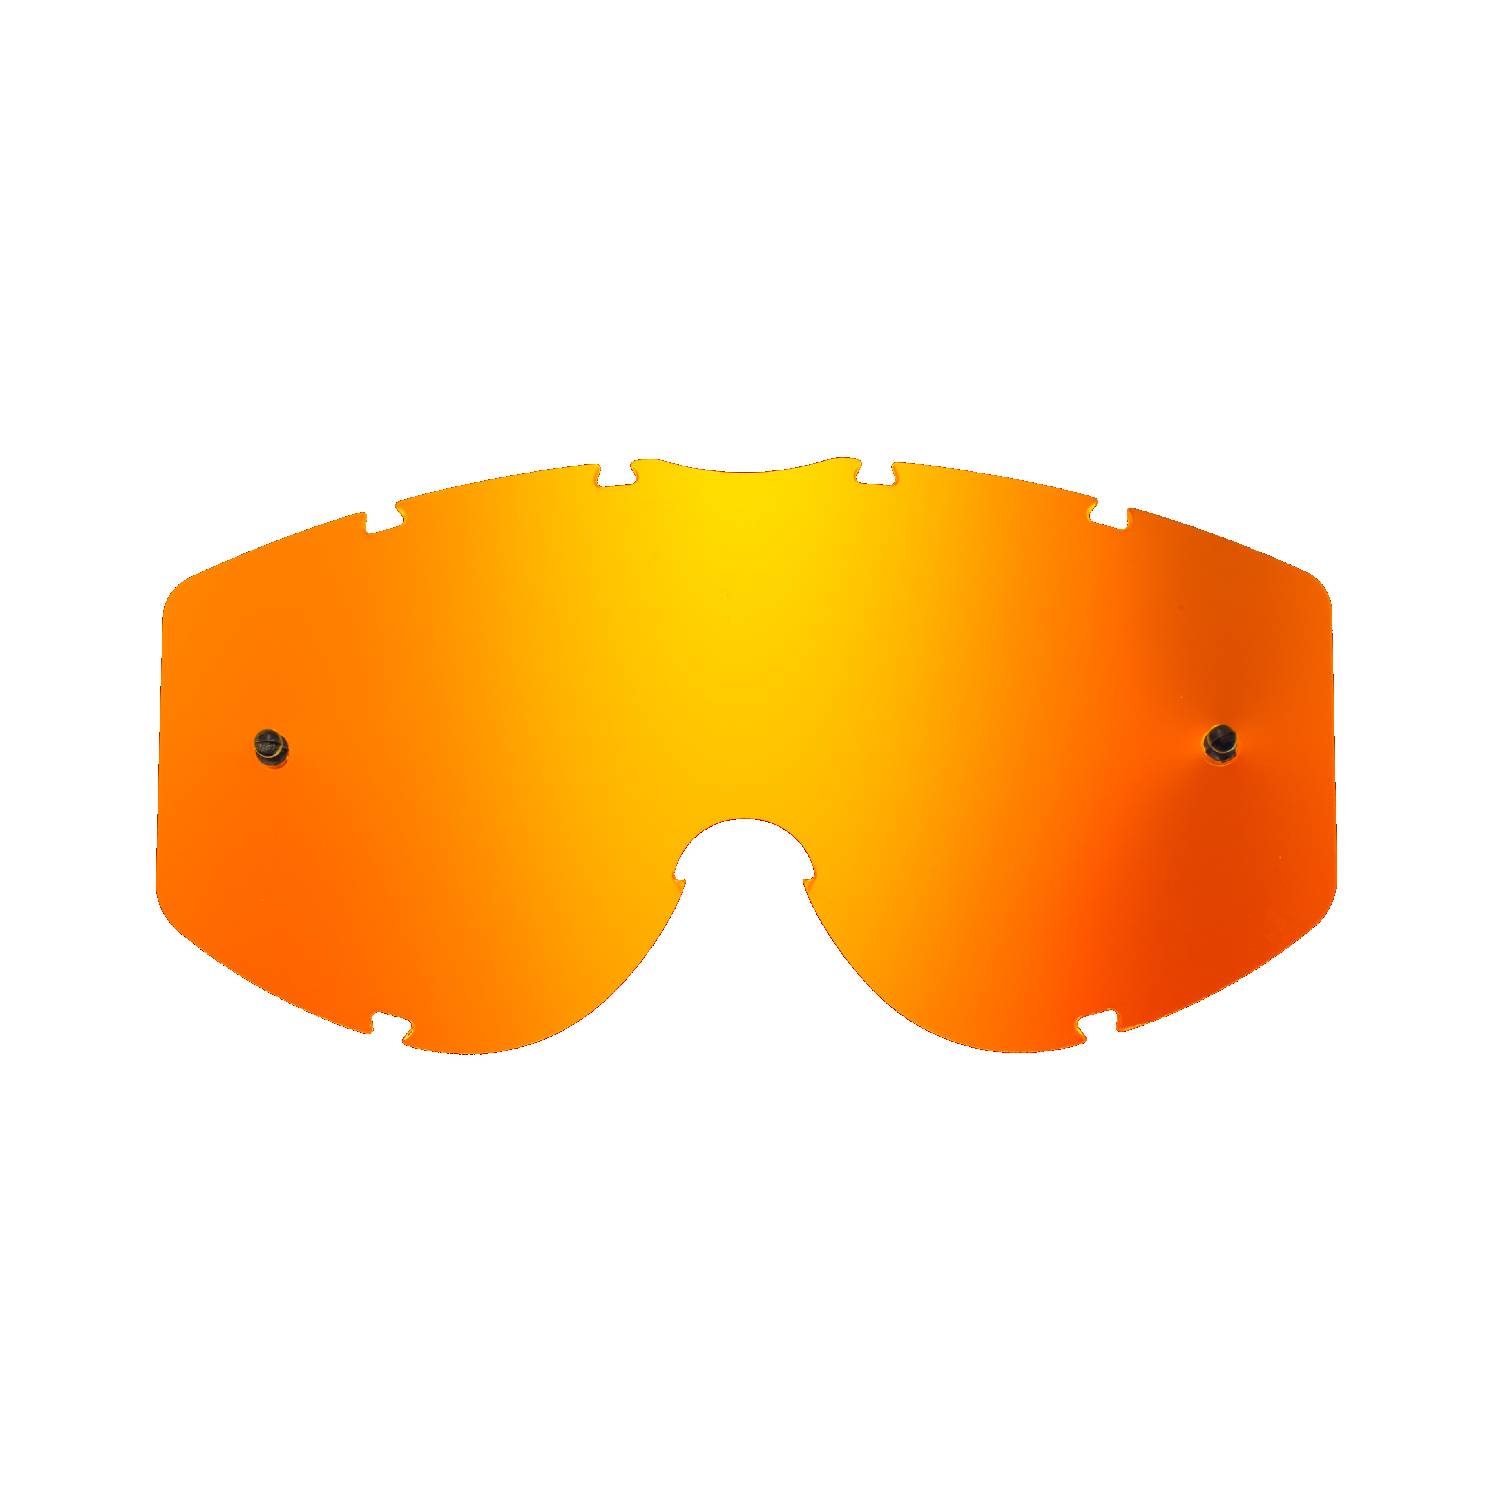 orange-toned mirrored replacement lenses for goggles compatible for  Progrip 3200 / 3450 / 3400  / 3201 / 3204 / 3301 goggle